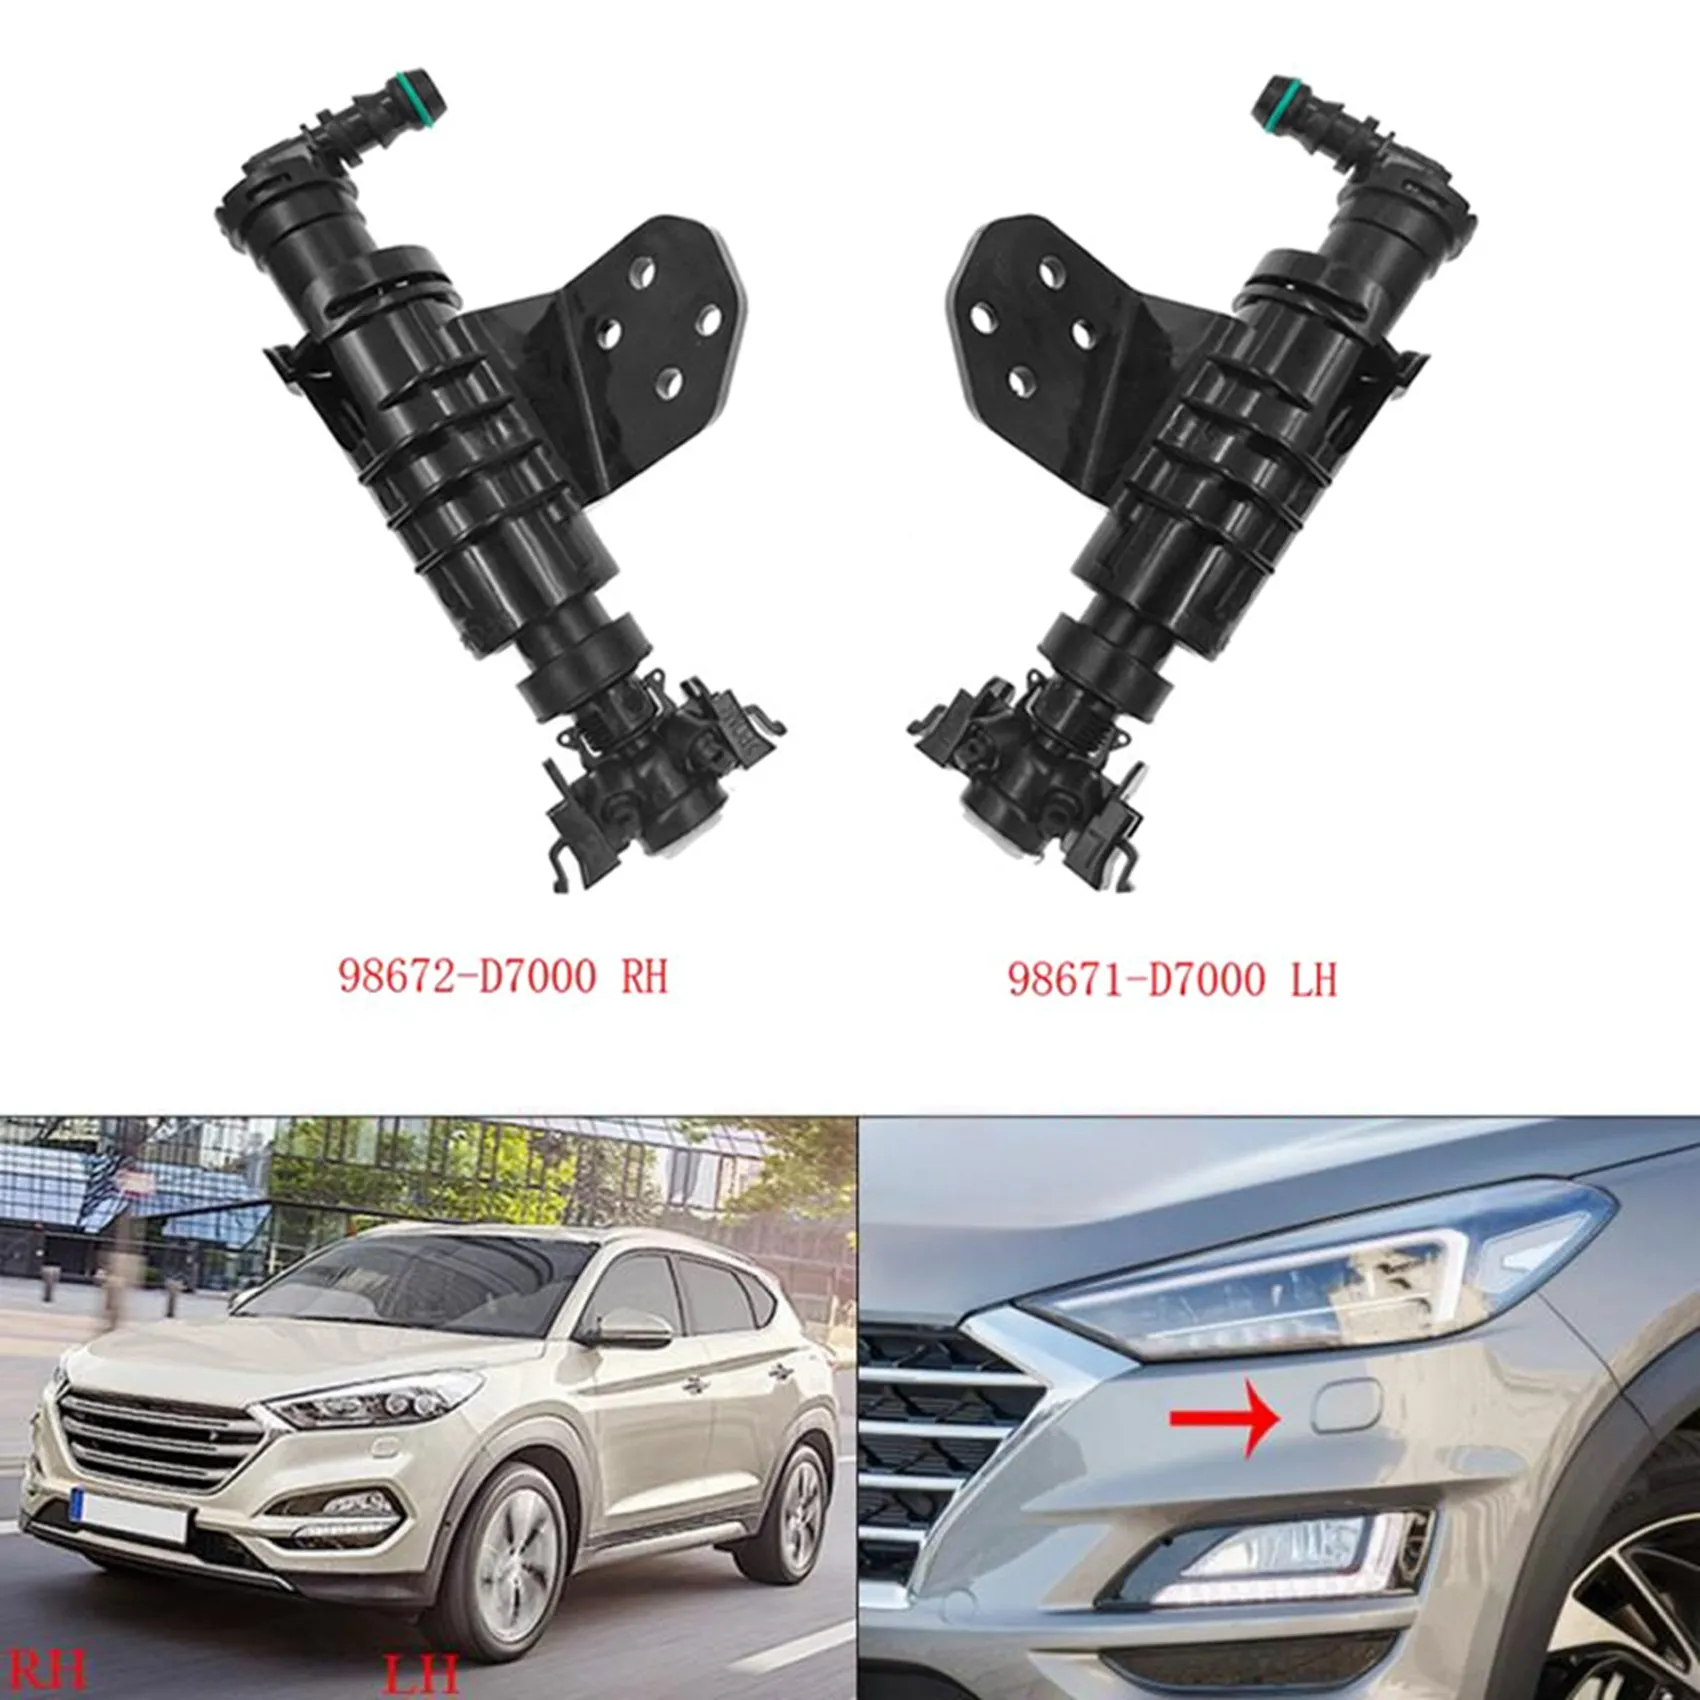 

Front Right Car Head Light Lamp Headlight Cleaning Washer Spray Nozzle Jet for Hyundai Tucson 98672-D7000